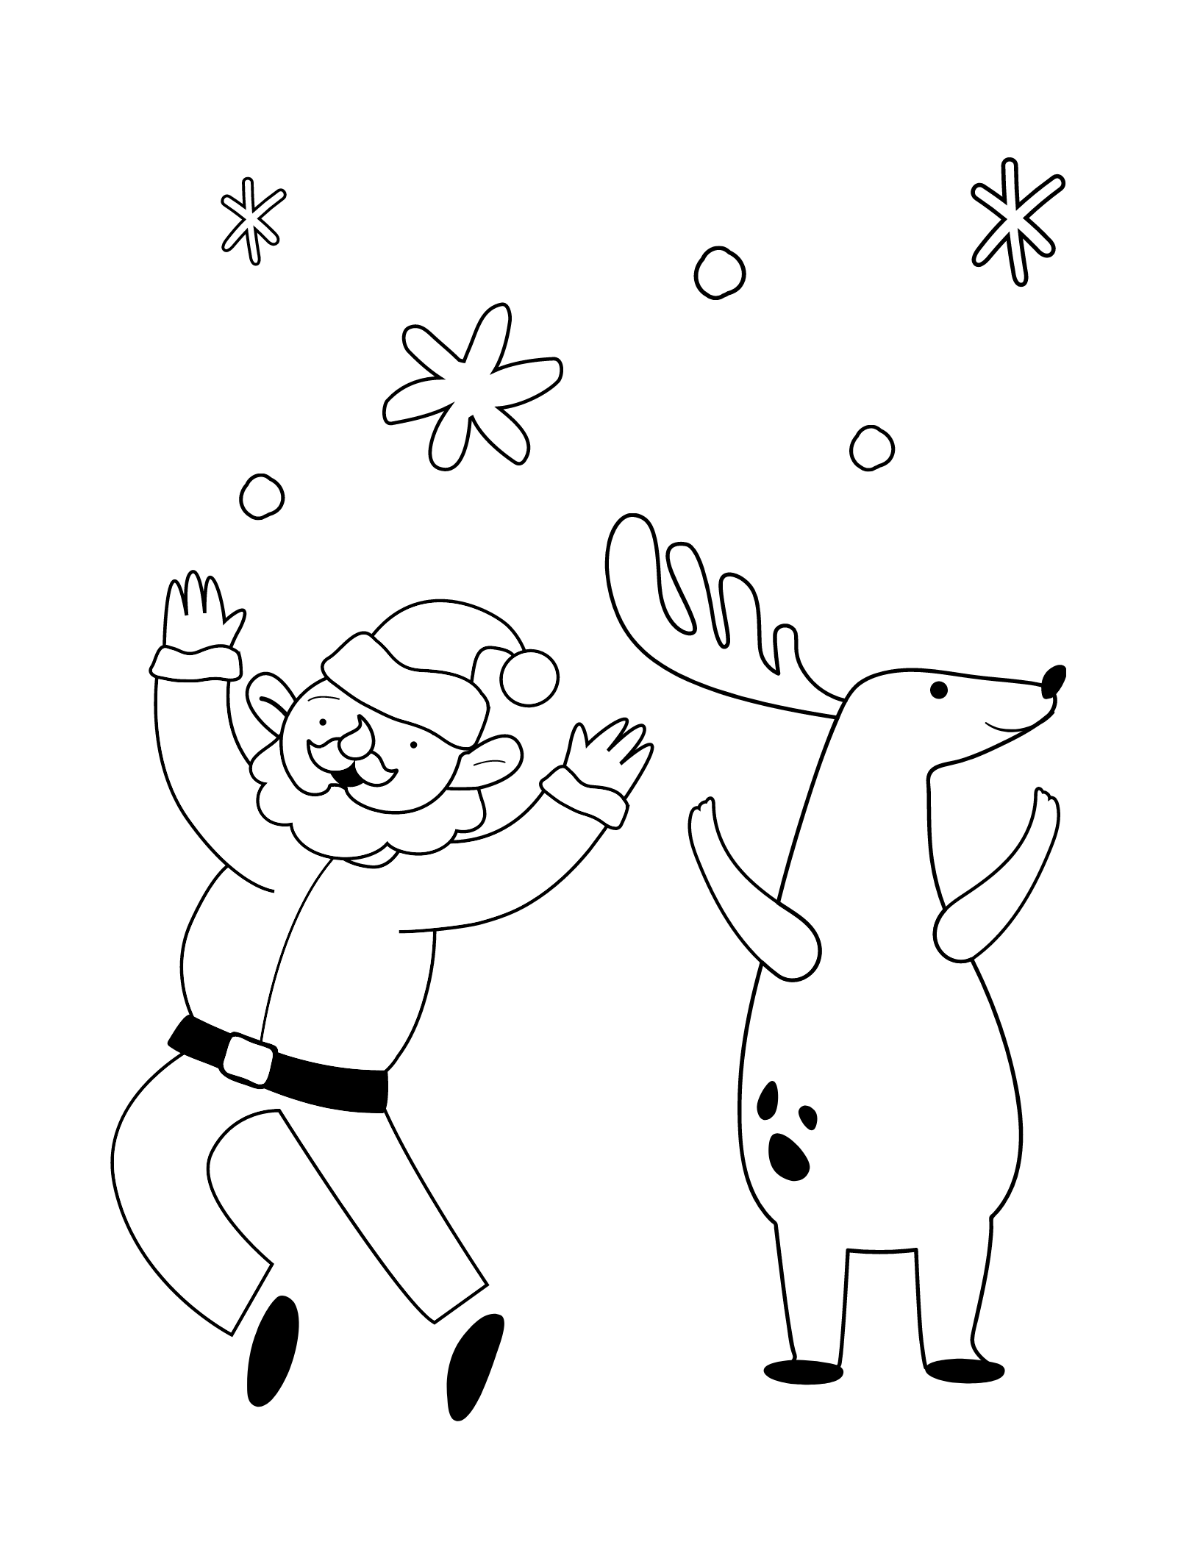 Happy Christmas Coloring Page